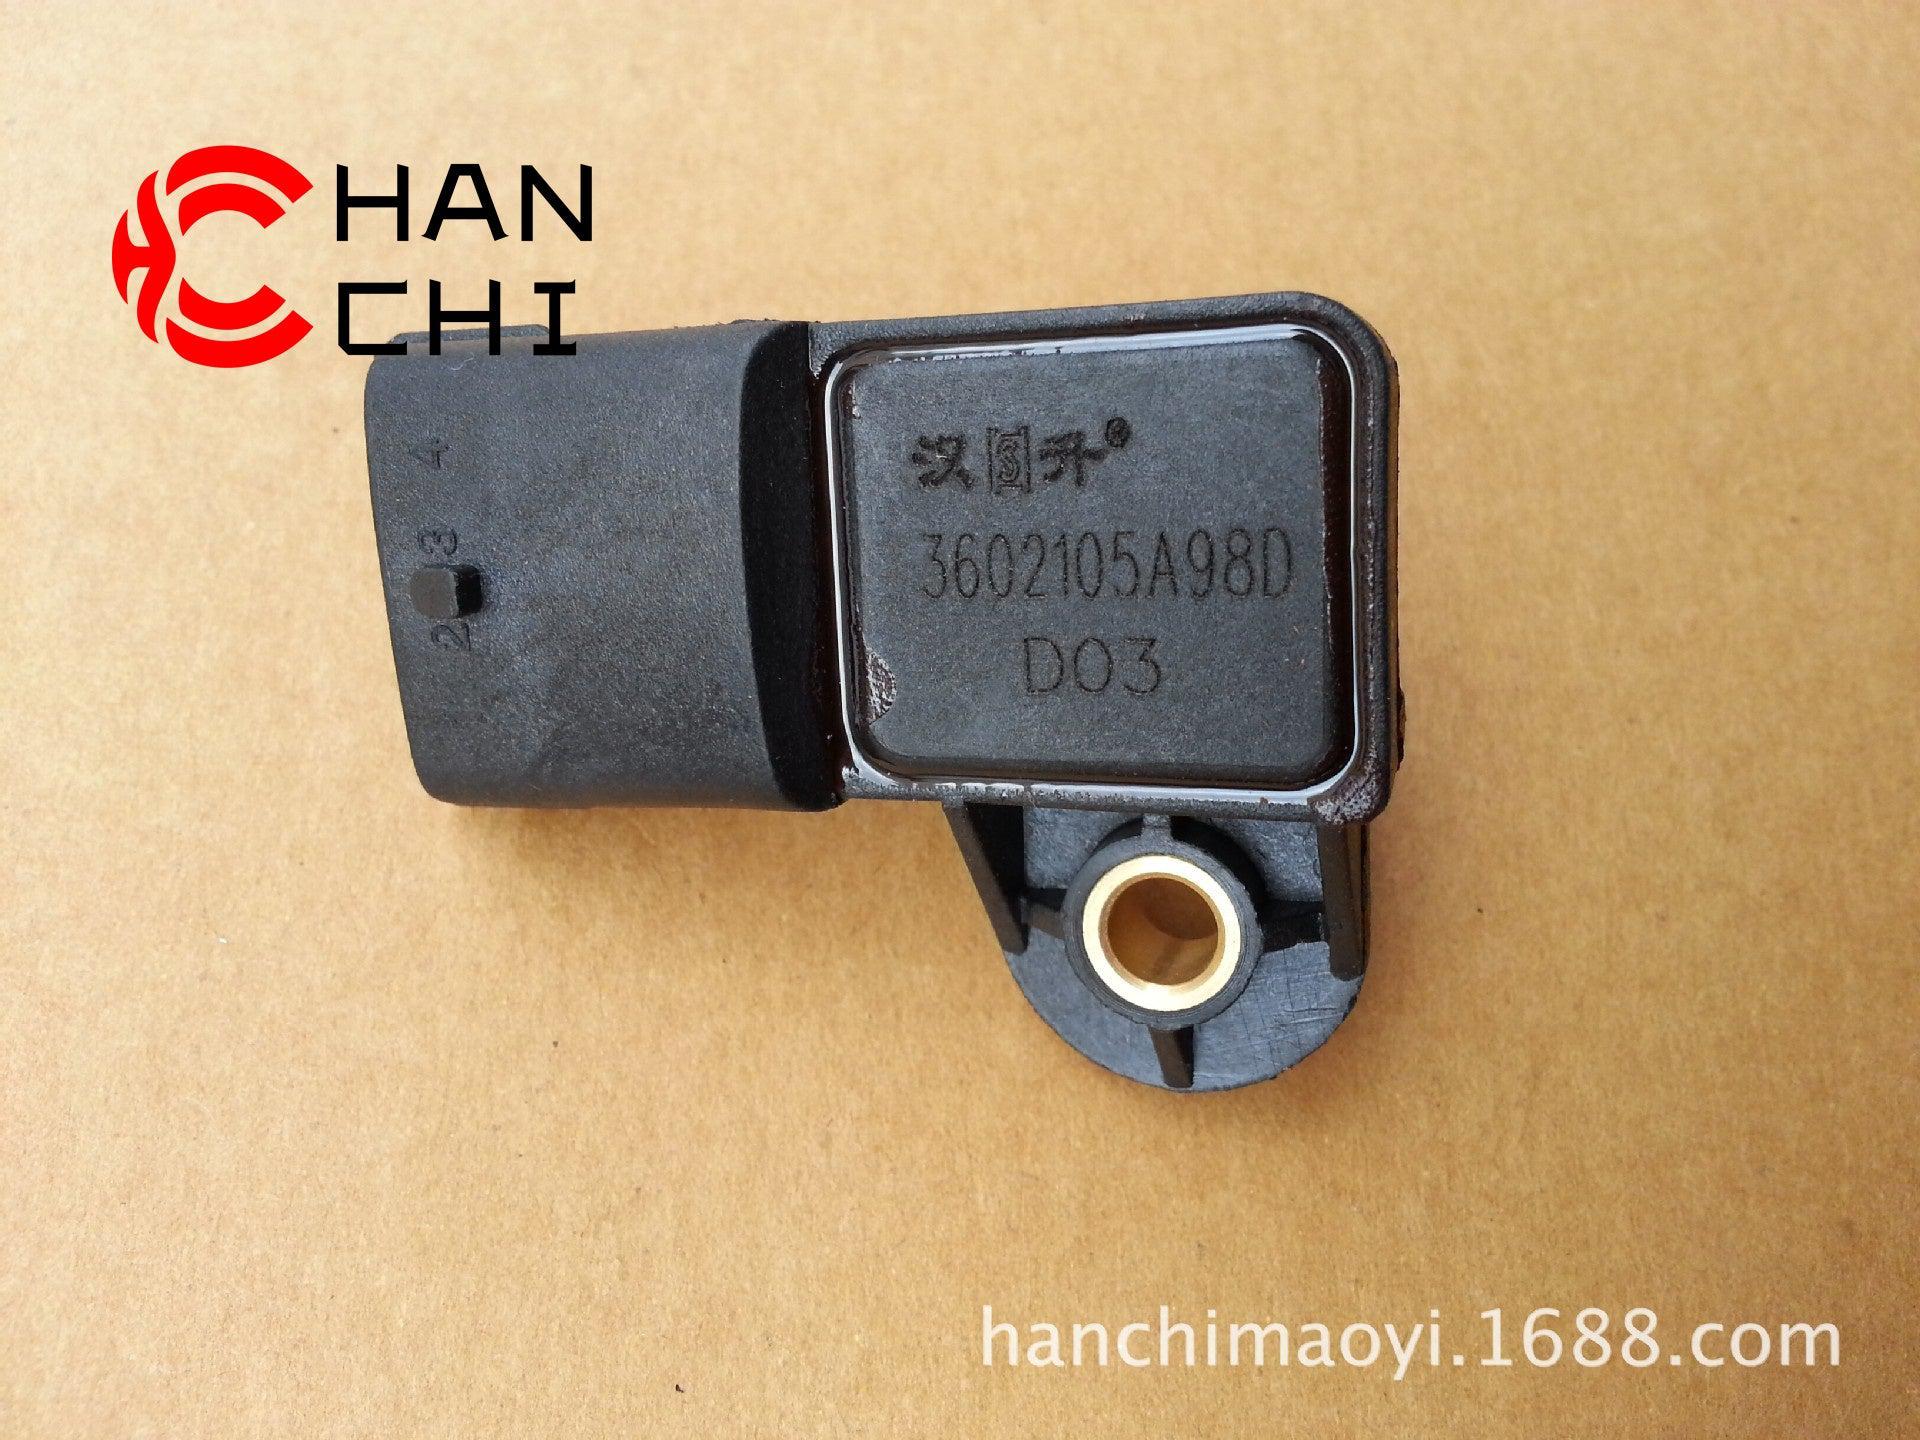 【Description】---☀Welcome to HANCHI☀---✔Good Quality✔Generally Applicability✔Competitive PriceEnjoy your shopping time↖（^ω^）↗【Features】Brand-New with High Quality for the Aftermarket.Totally mathced your need.**Stable Quality**High Precision**Easy Installation**【Specification】OEM：3602105A98DMaterial：ABSColor：blackOrigin：Made in ChinaWeight：100g【Packing List】1* MAP Sensor 【More Service】 We can provide OEM service We can Be your one-step solution for Auto Parts We can provide technical scheme for y